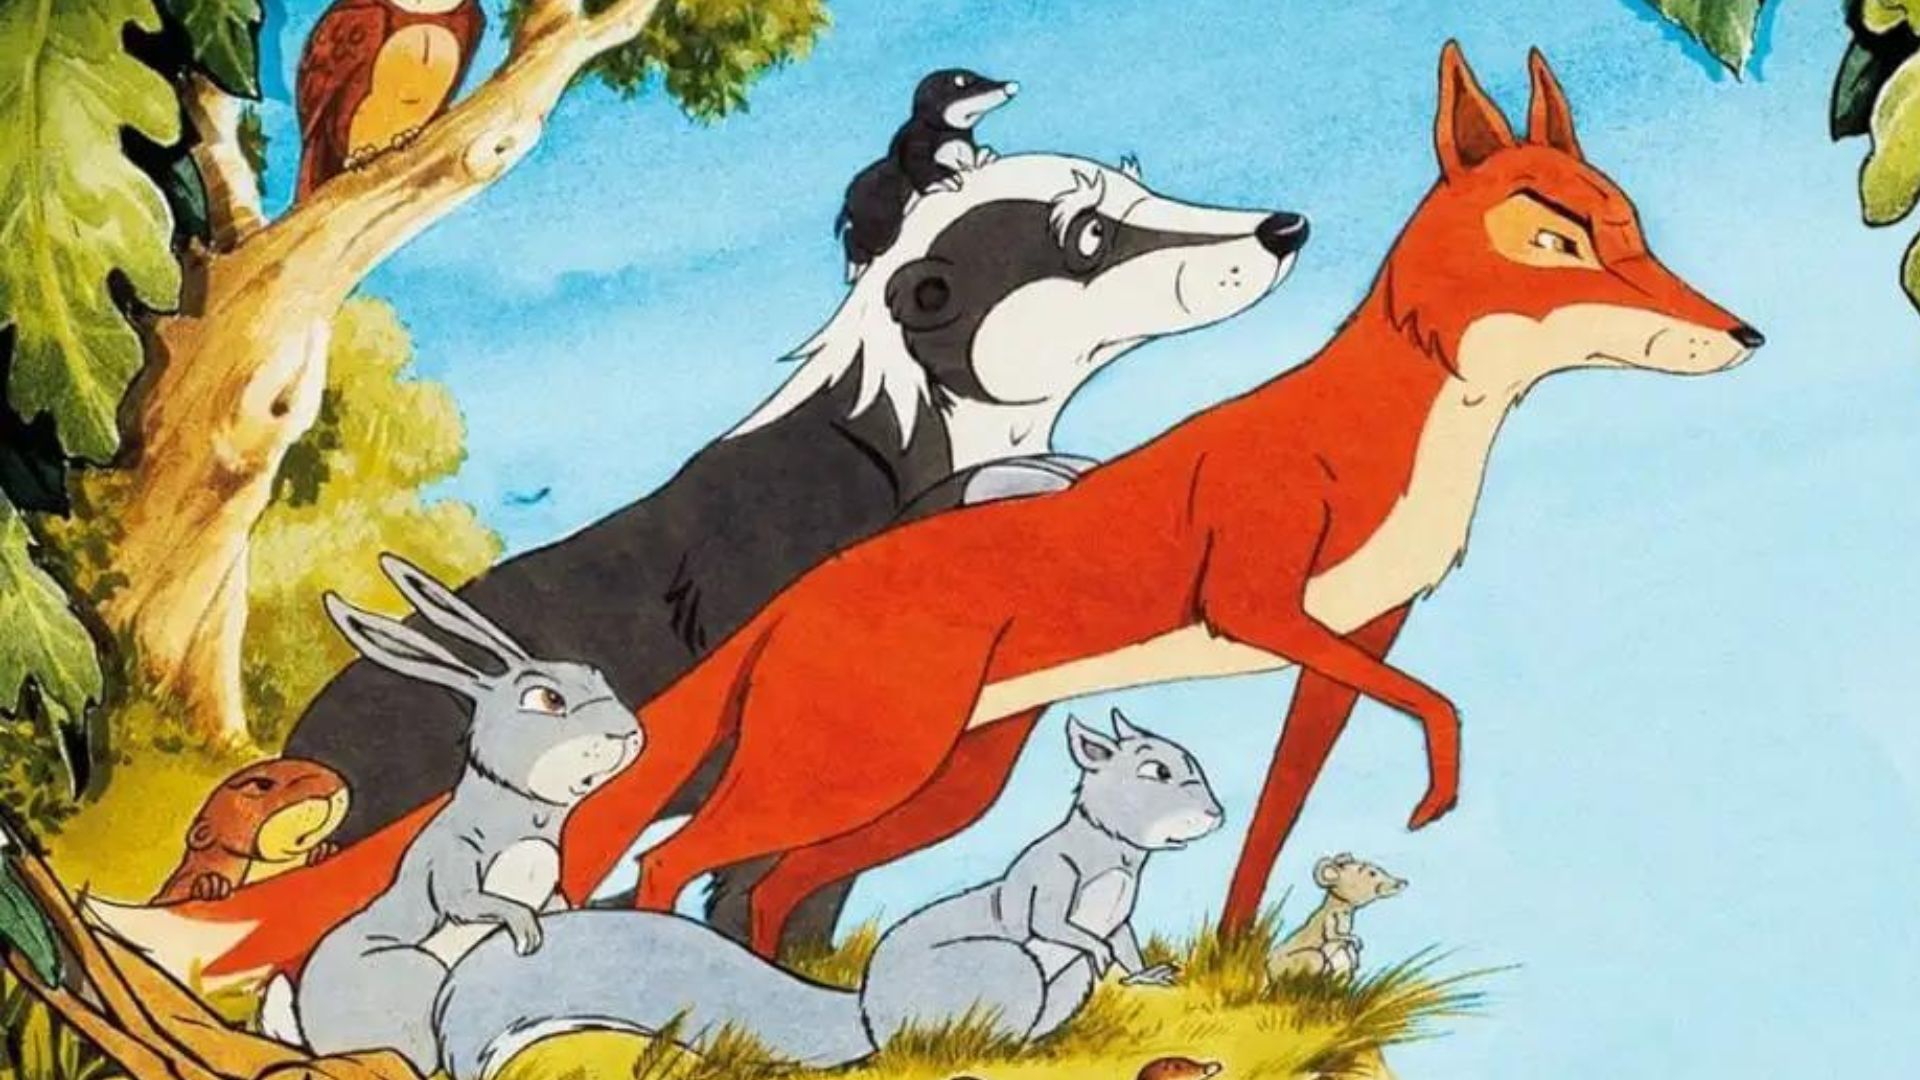 Retro Cartoons - 20 Retro Cartoons That You May Have Forgotten About